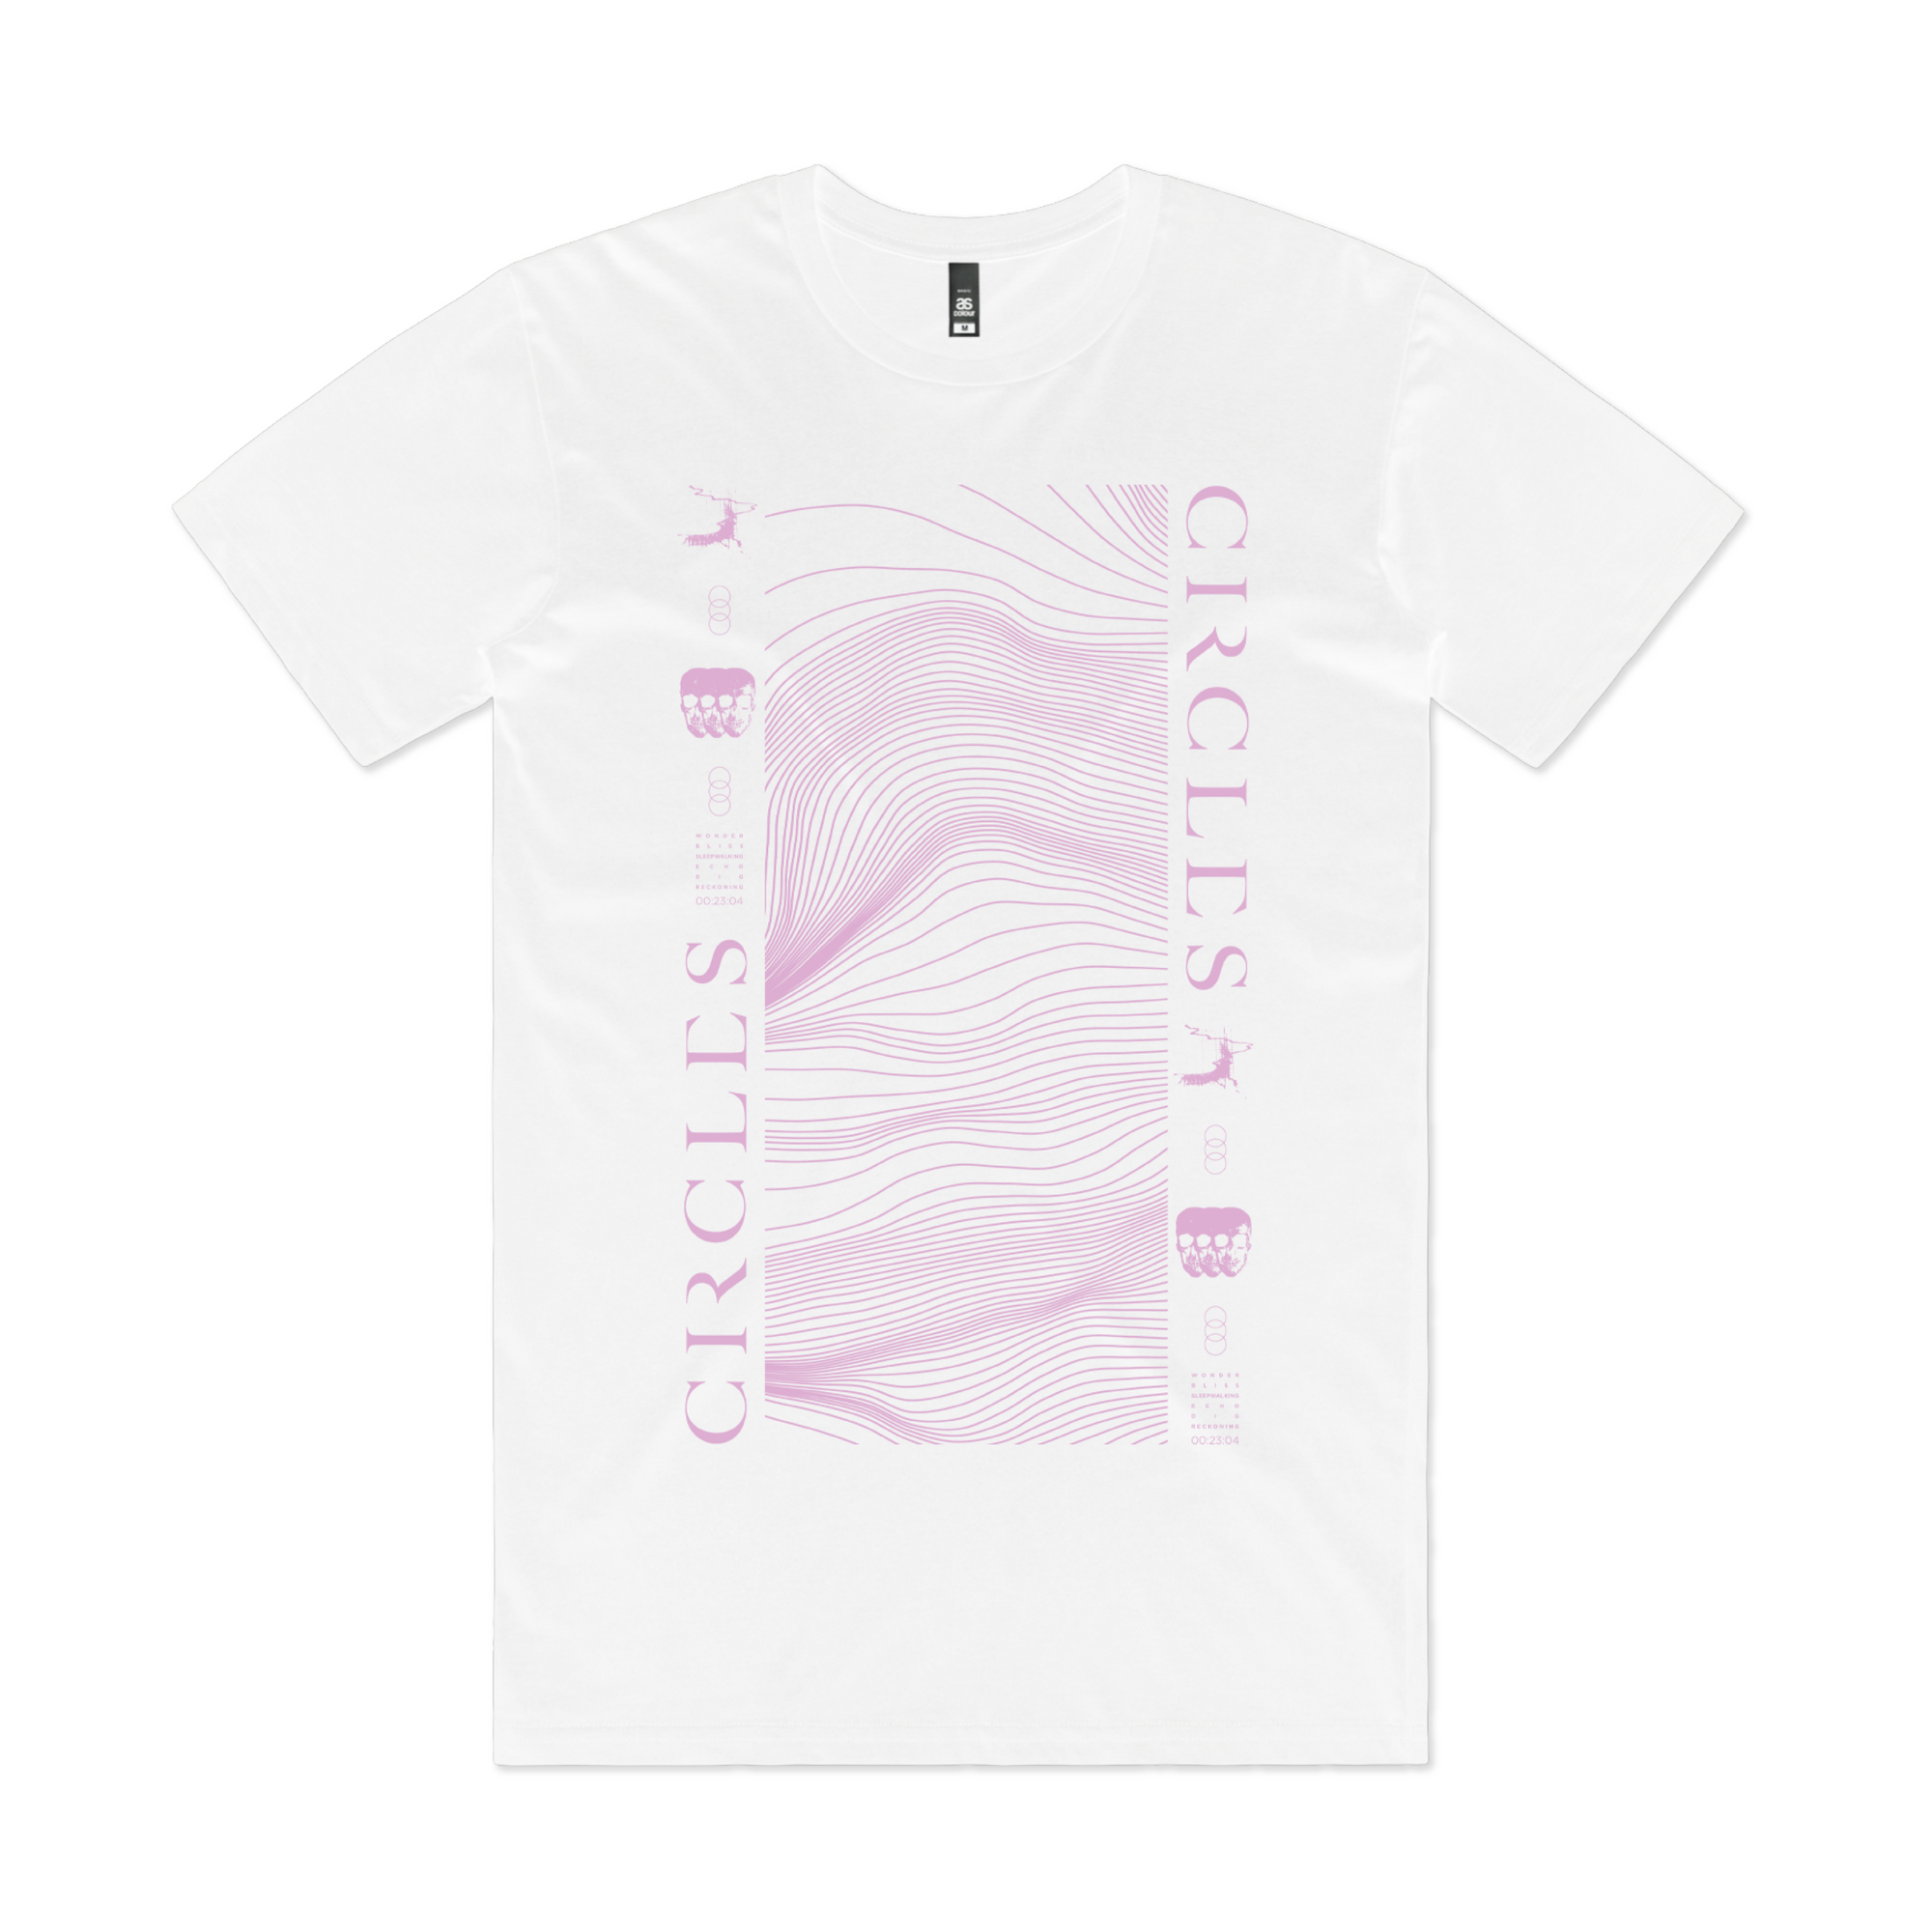 Circles // THE STORIES WE ARE AFRAID OF | VOL.1 - WHITE SPECTRUM T-SHIRT (T-Shirt)